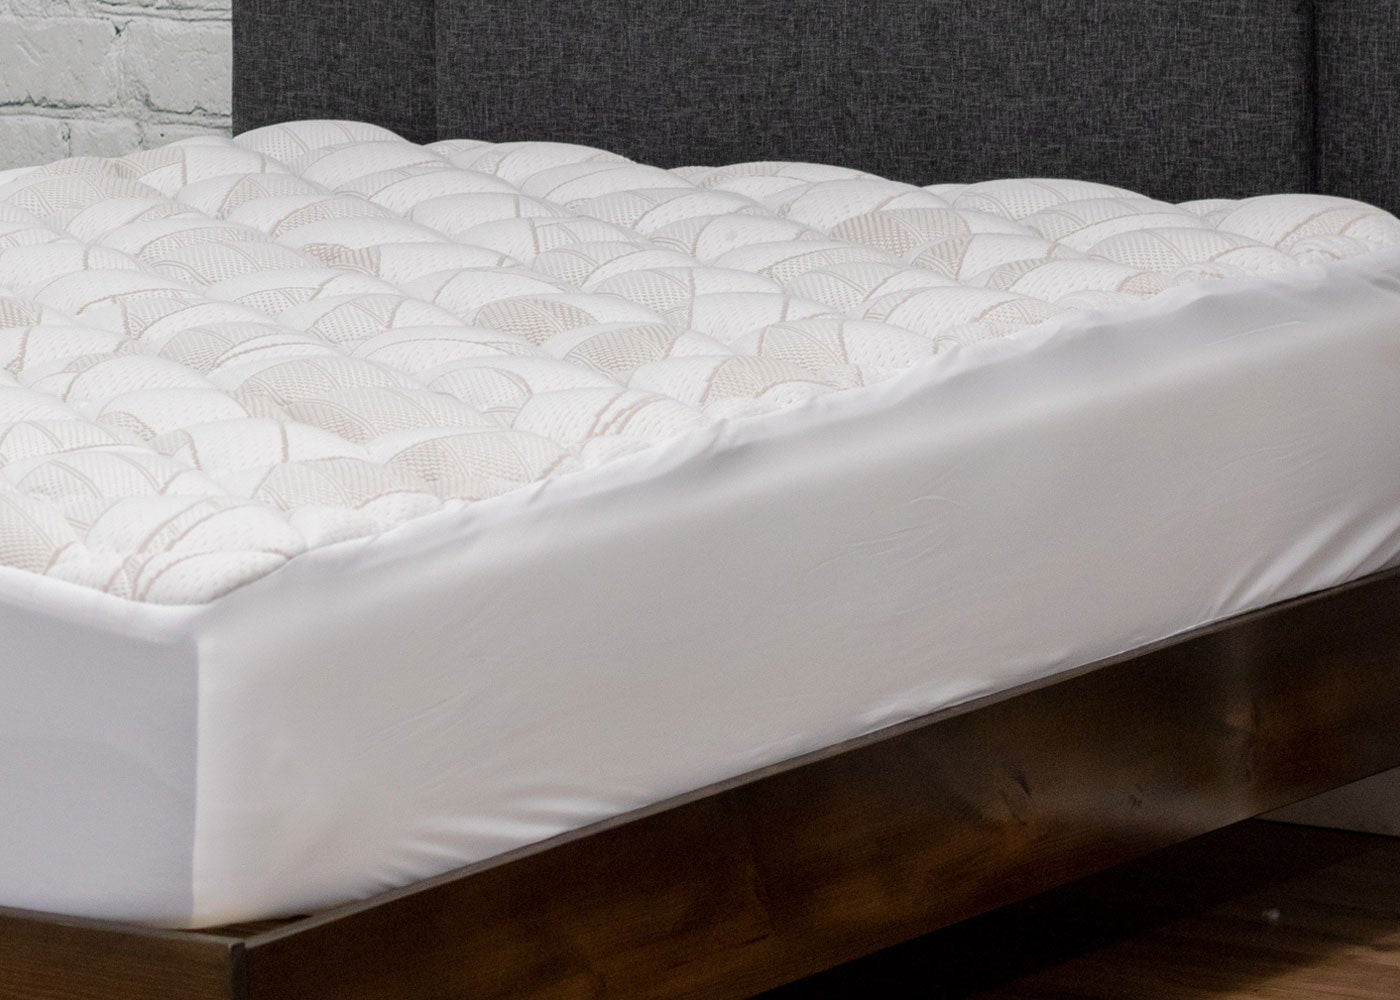 Copper Infused Mattress Pad by eLuxury